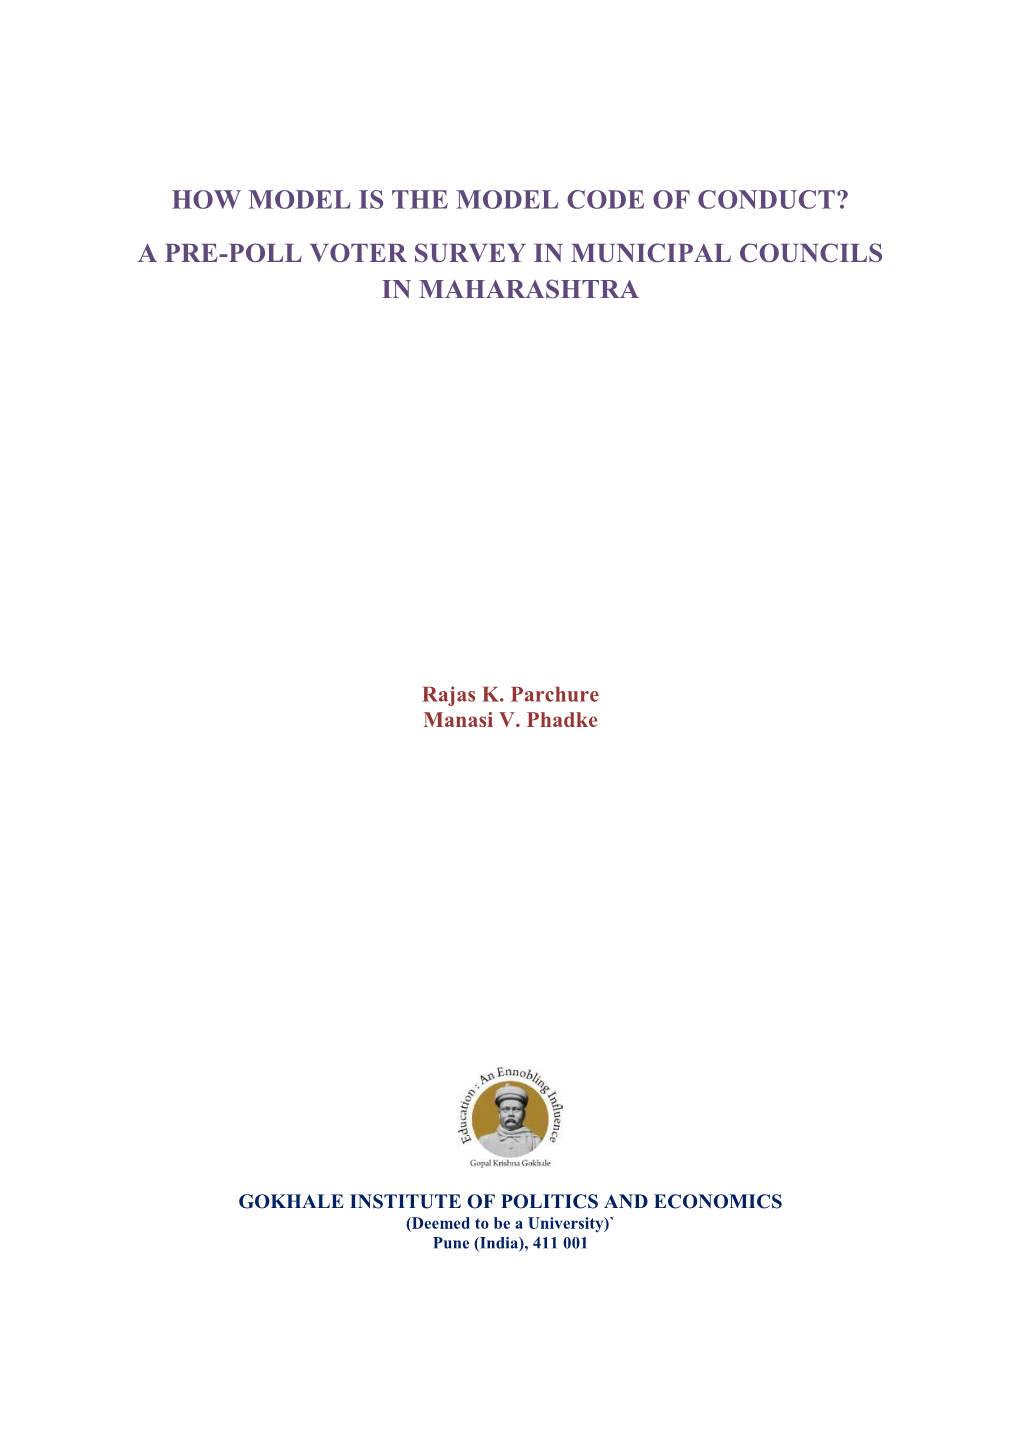 How Model Is the Model Code of Conduct? a Pre-Poll Voter Survey in Municipal Councils in Maharashtra